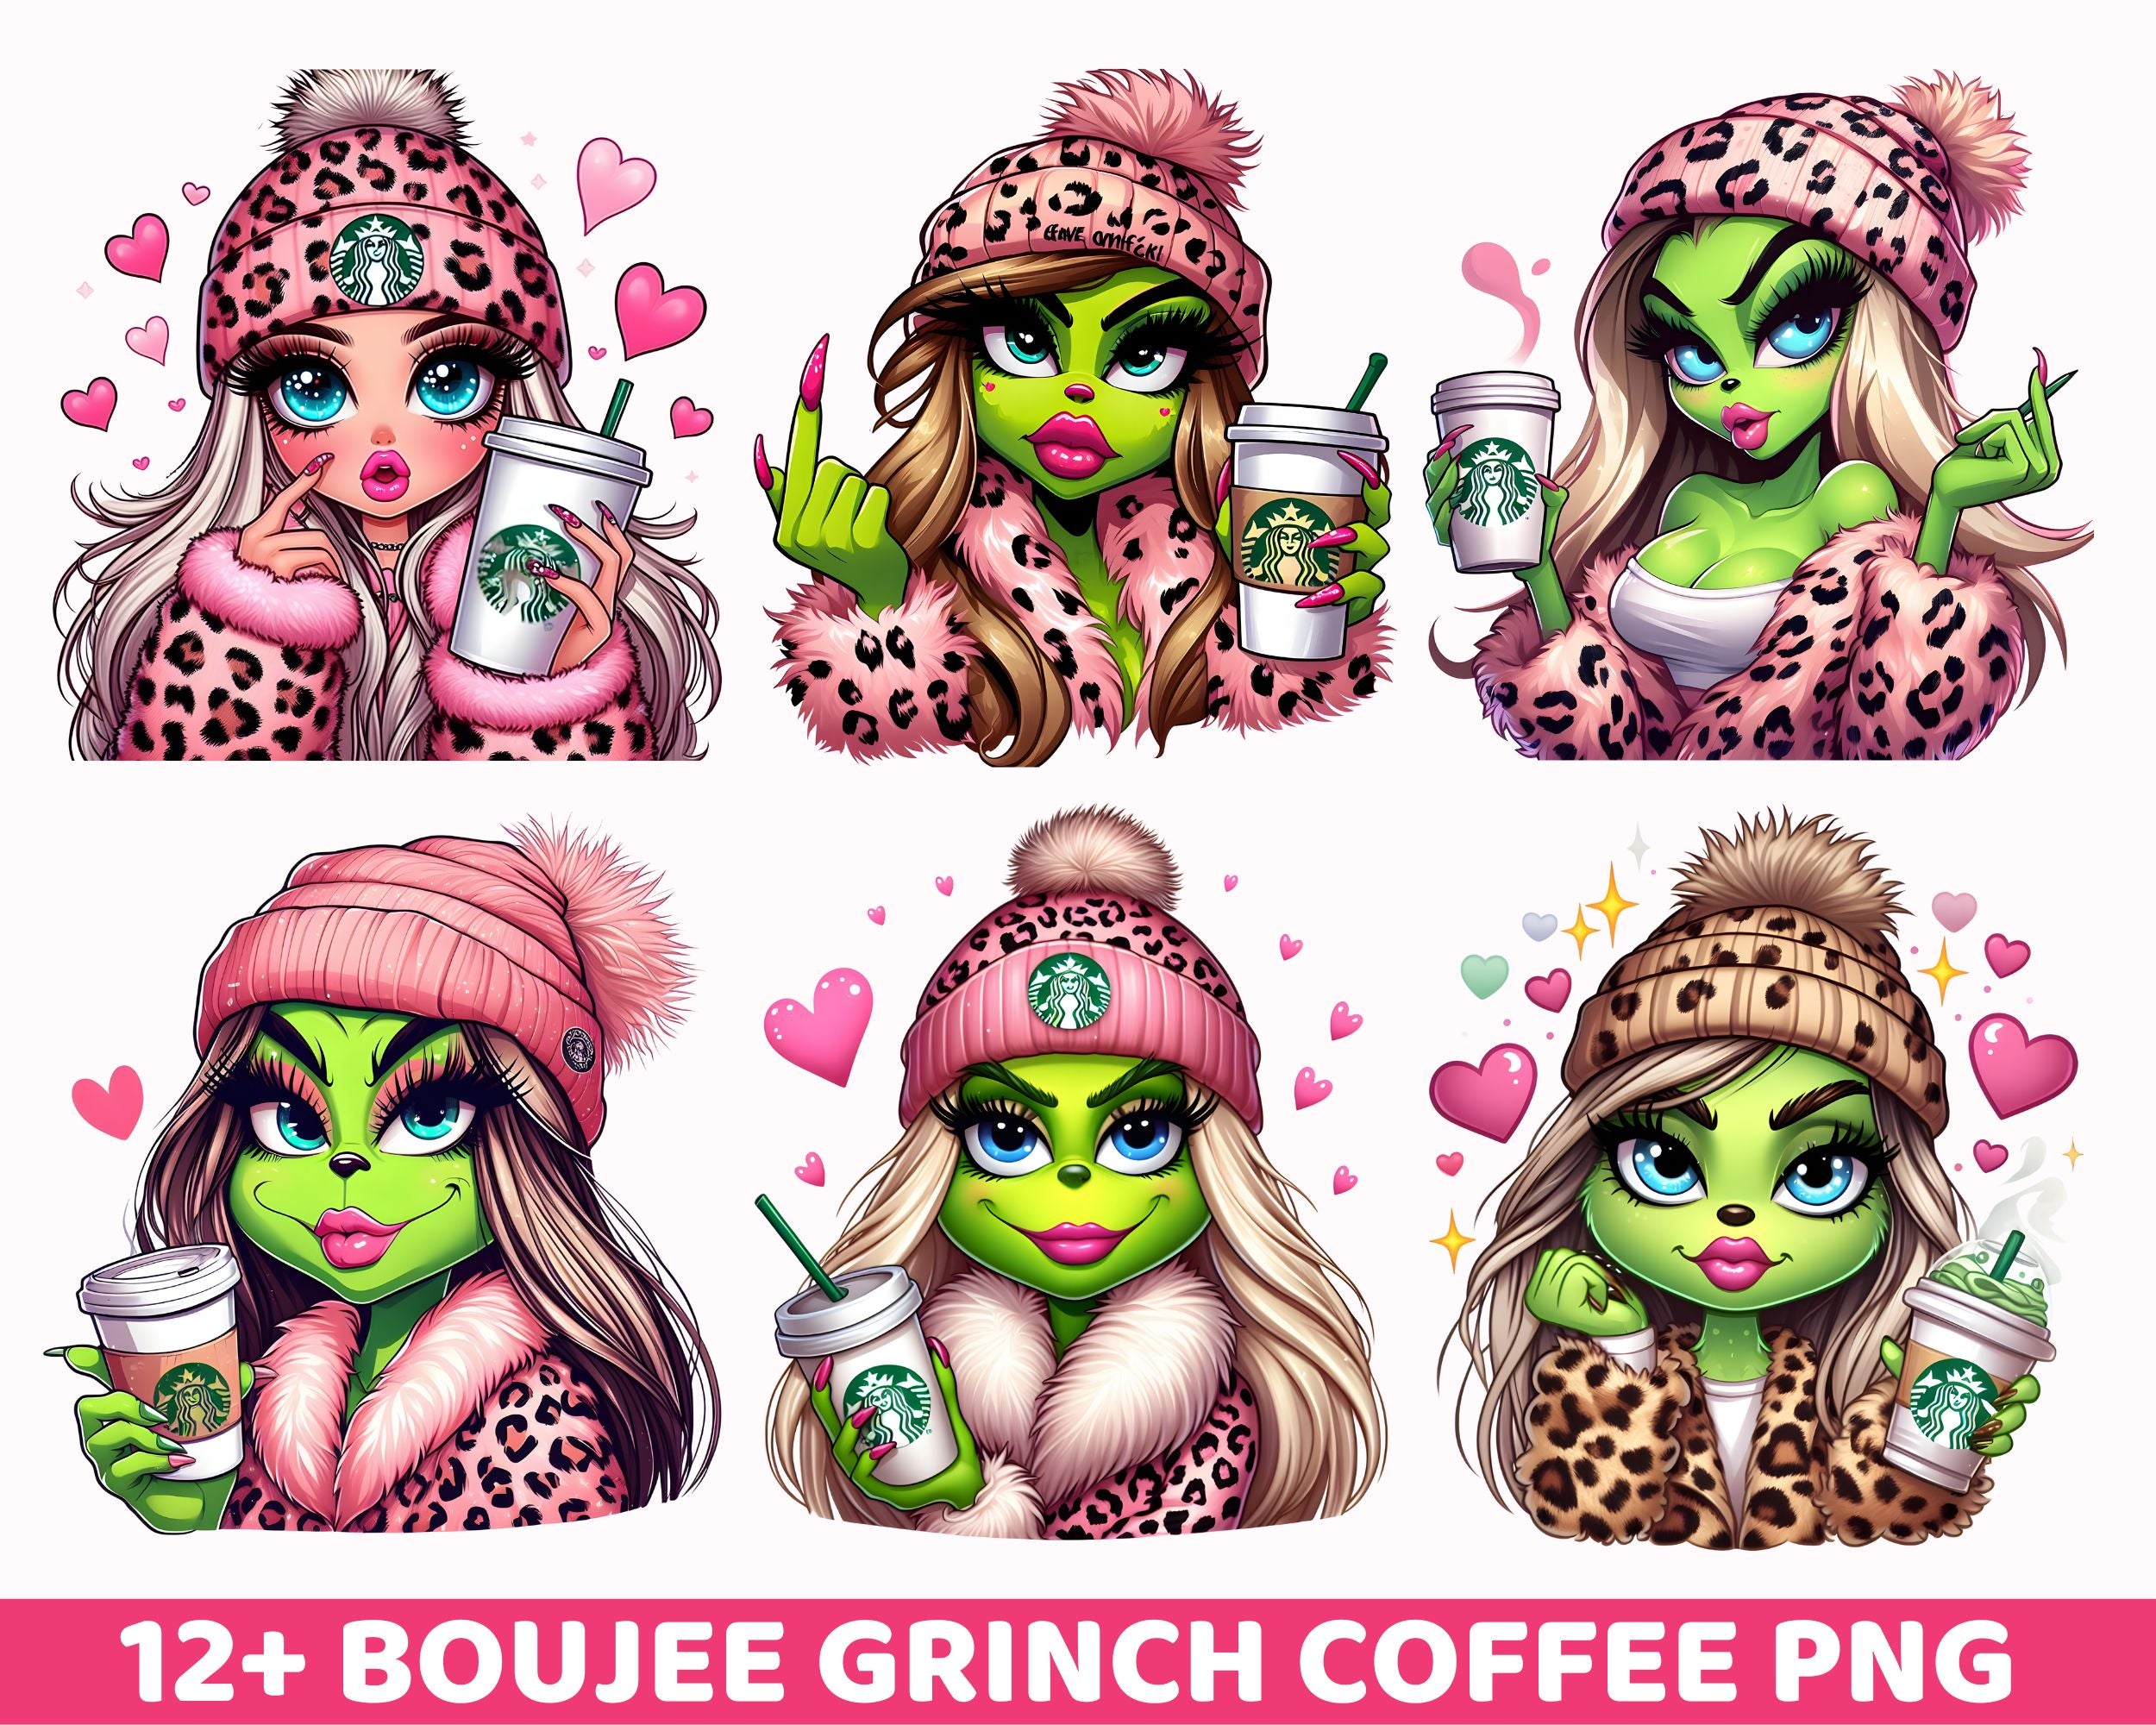 12+ Cute Grinc Girl Png, Boujee Grinch Coffee Png, Grinch Beanie Png, Instant Download